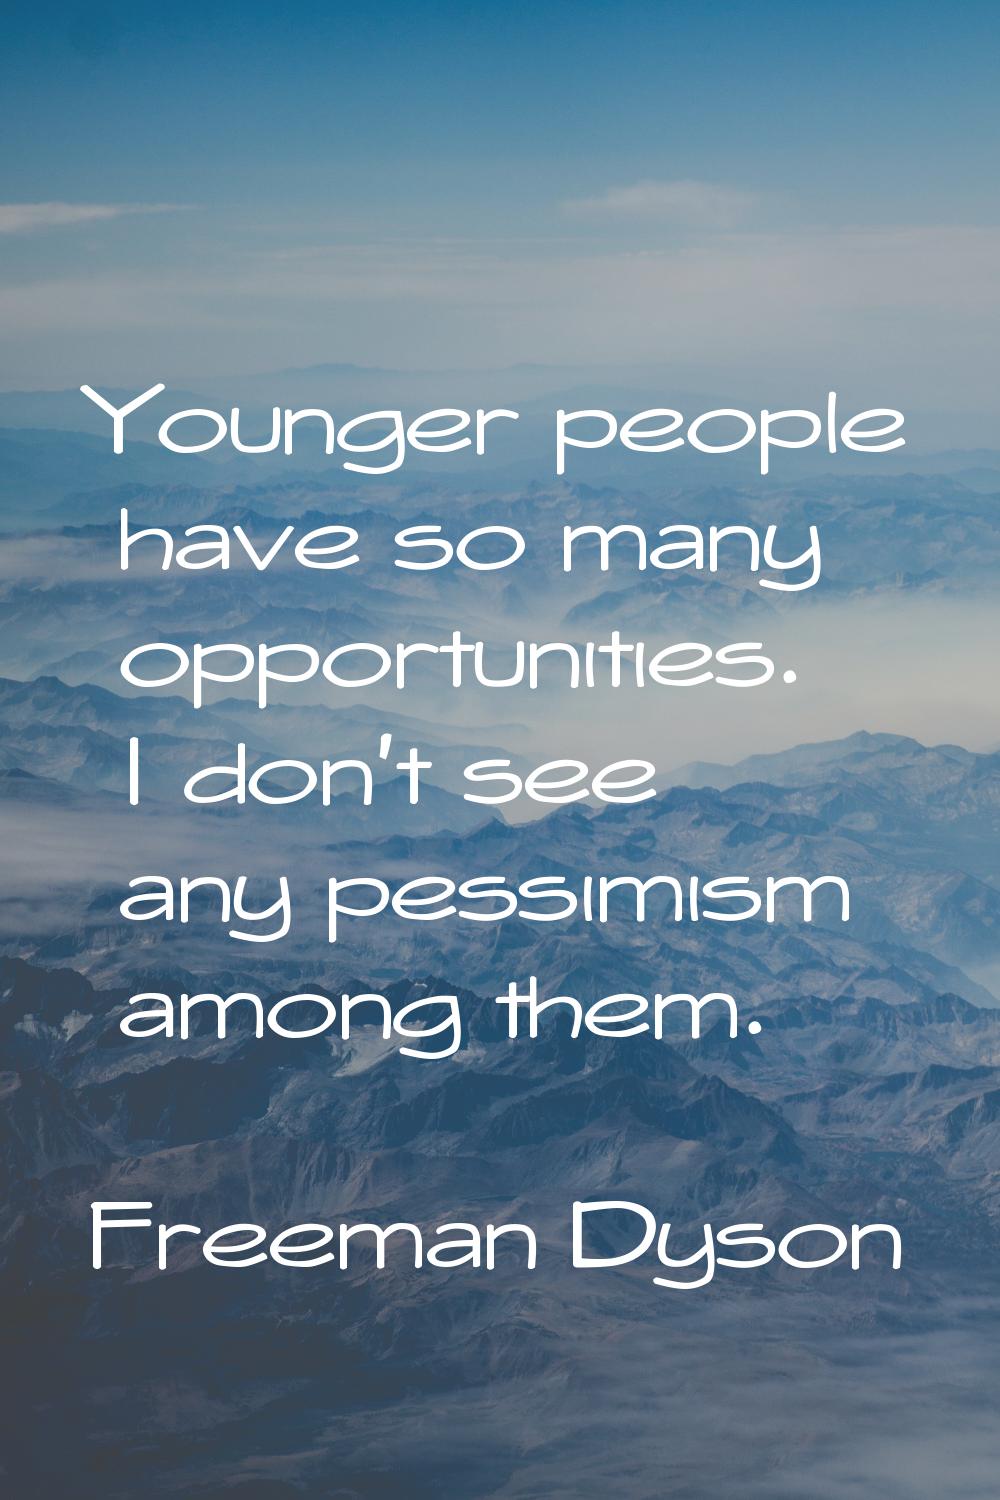 Younger people have so many opportunities. I don't see any pessimism among them.